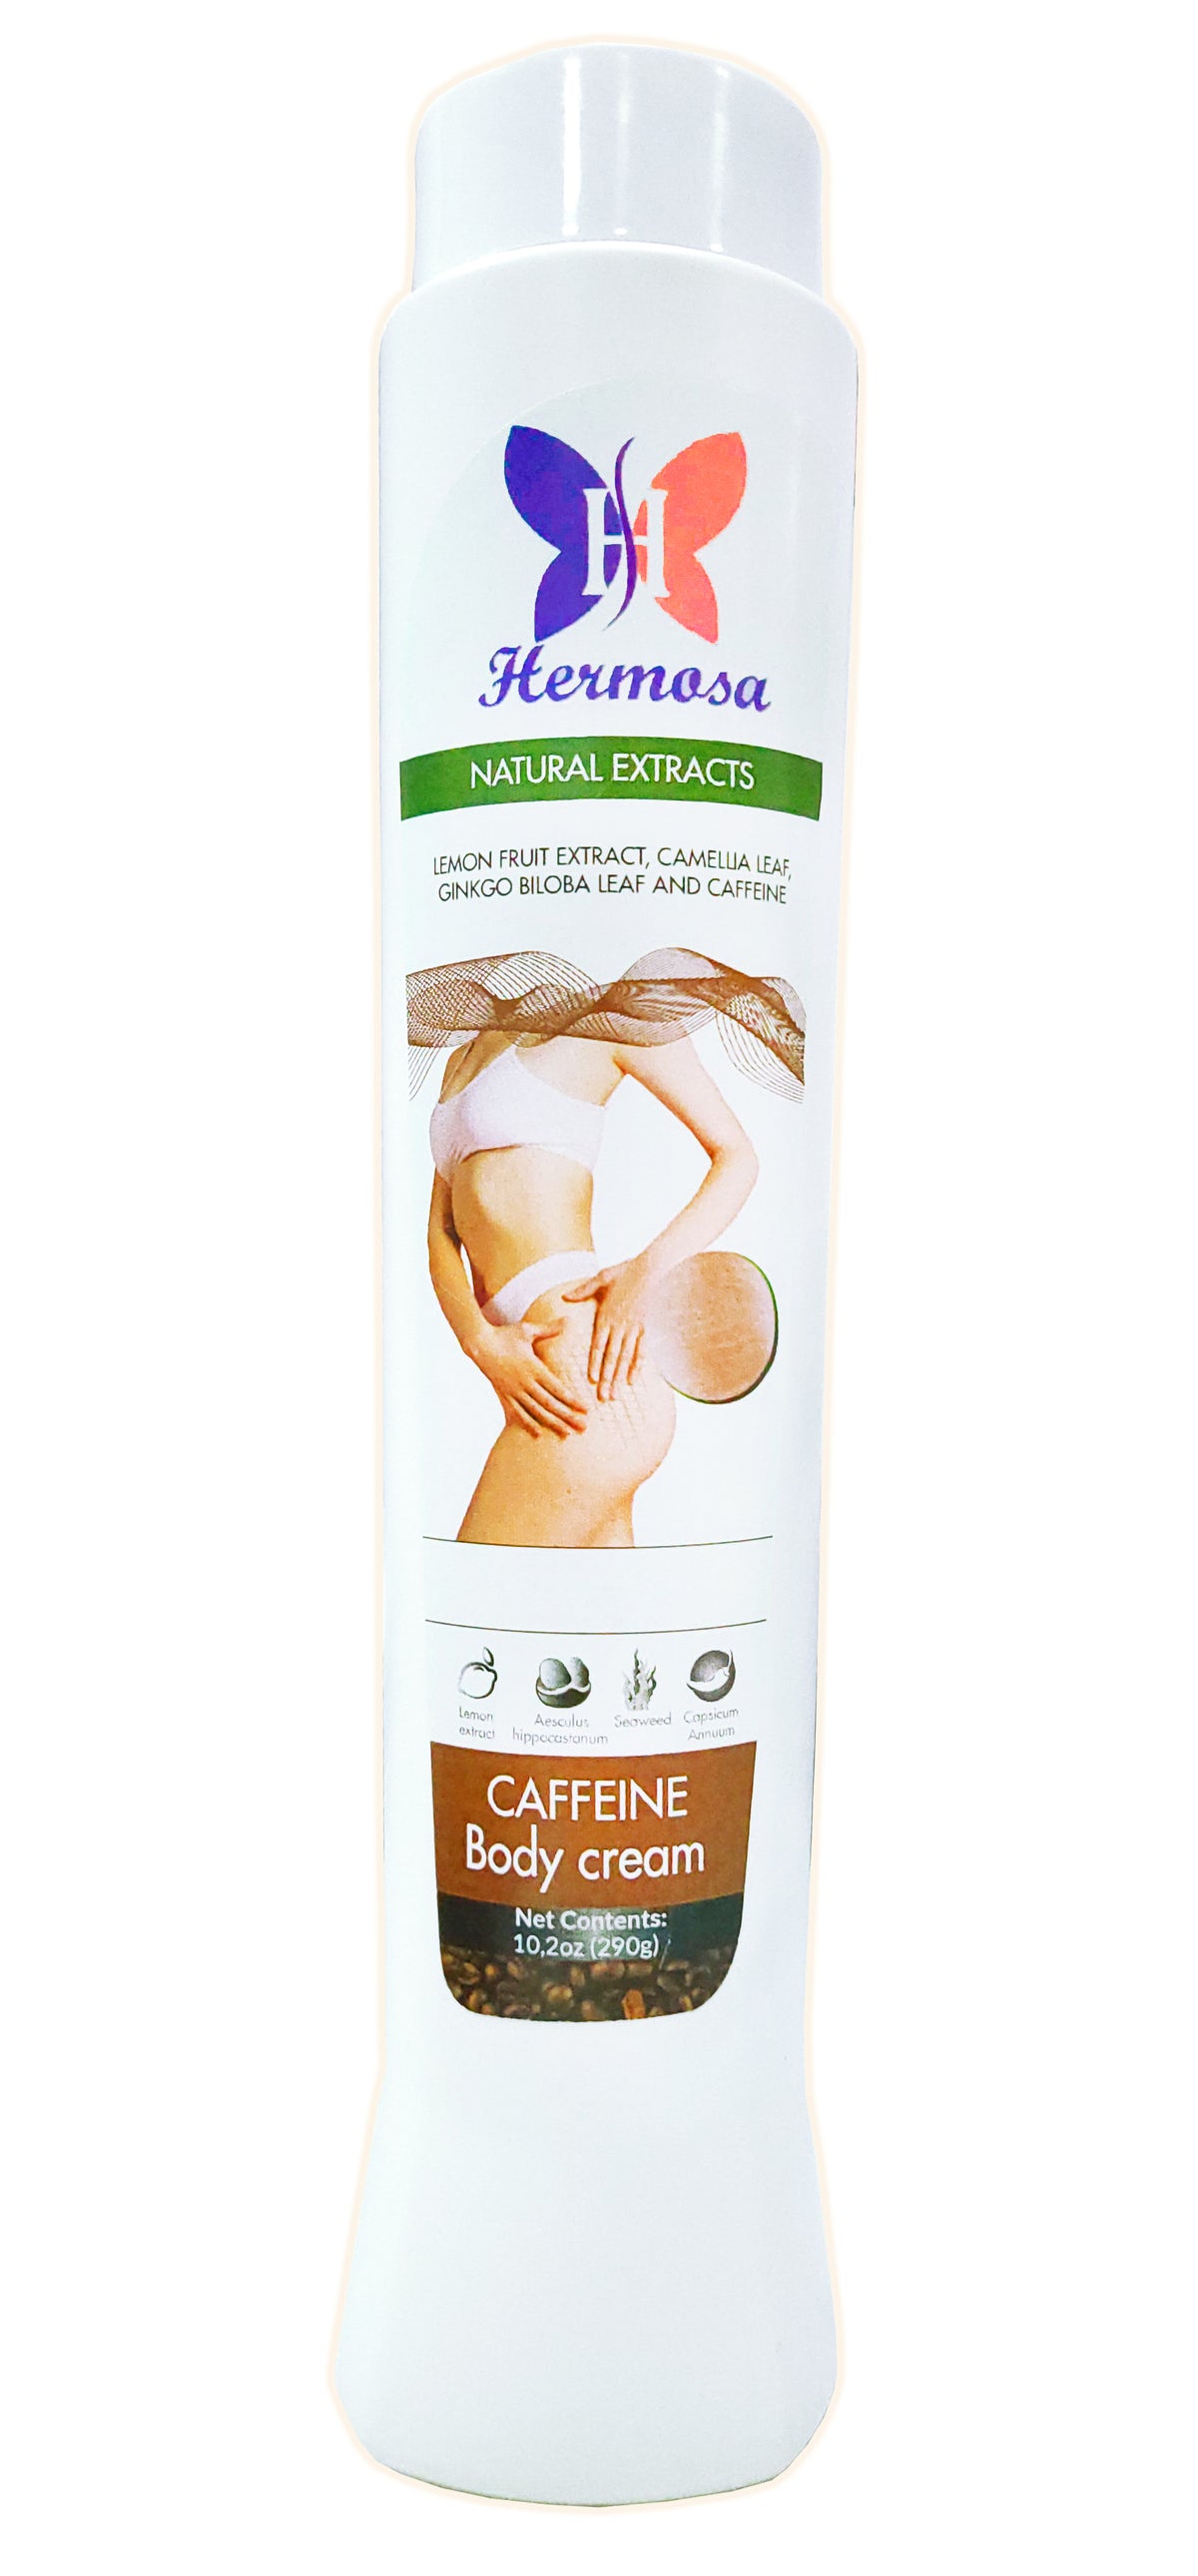 Caffeine Body Cream - Slimming gels - anticellulite effect - skin firming, slimming - fat burning to reduce inches - excellent slimming cream for size